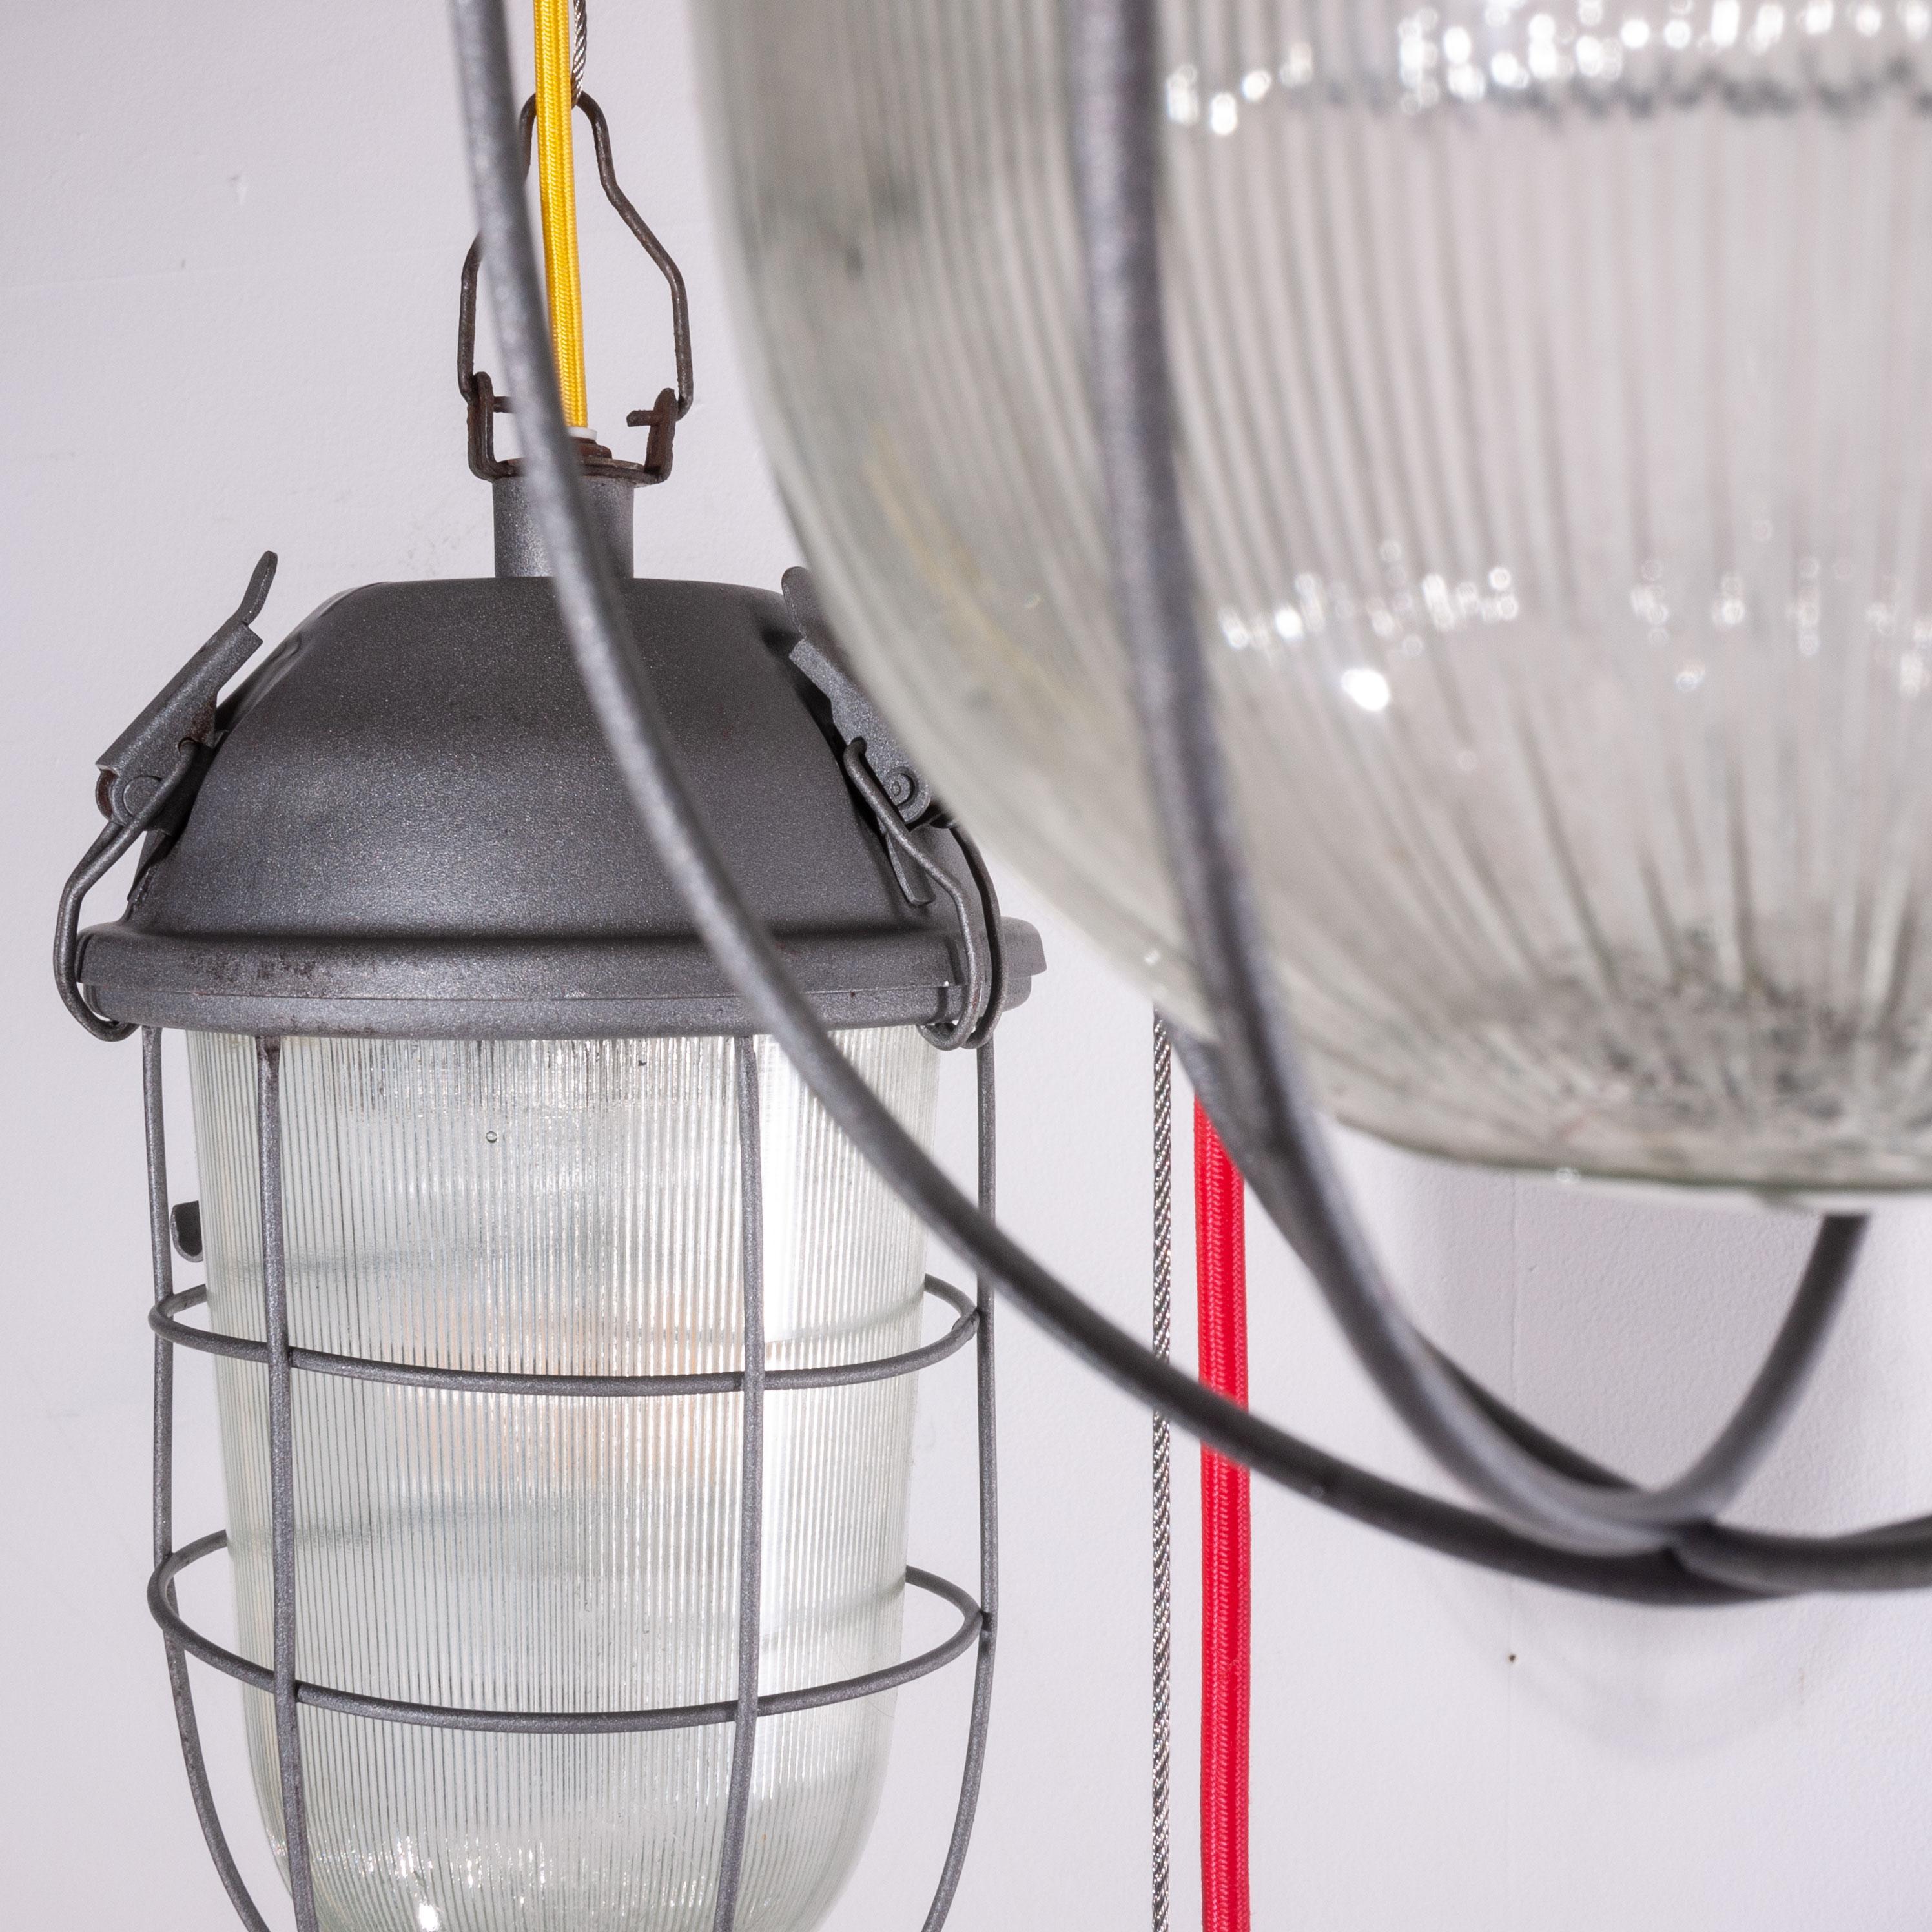 1960s industrial caged hanging ceiling pendant lamps/lights with original glass – Various quantities available
1960s vintage industrial caged hanging ceiling pendant lamps/lights with original glass. We have a large number of these stunning caged